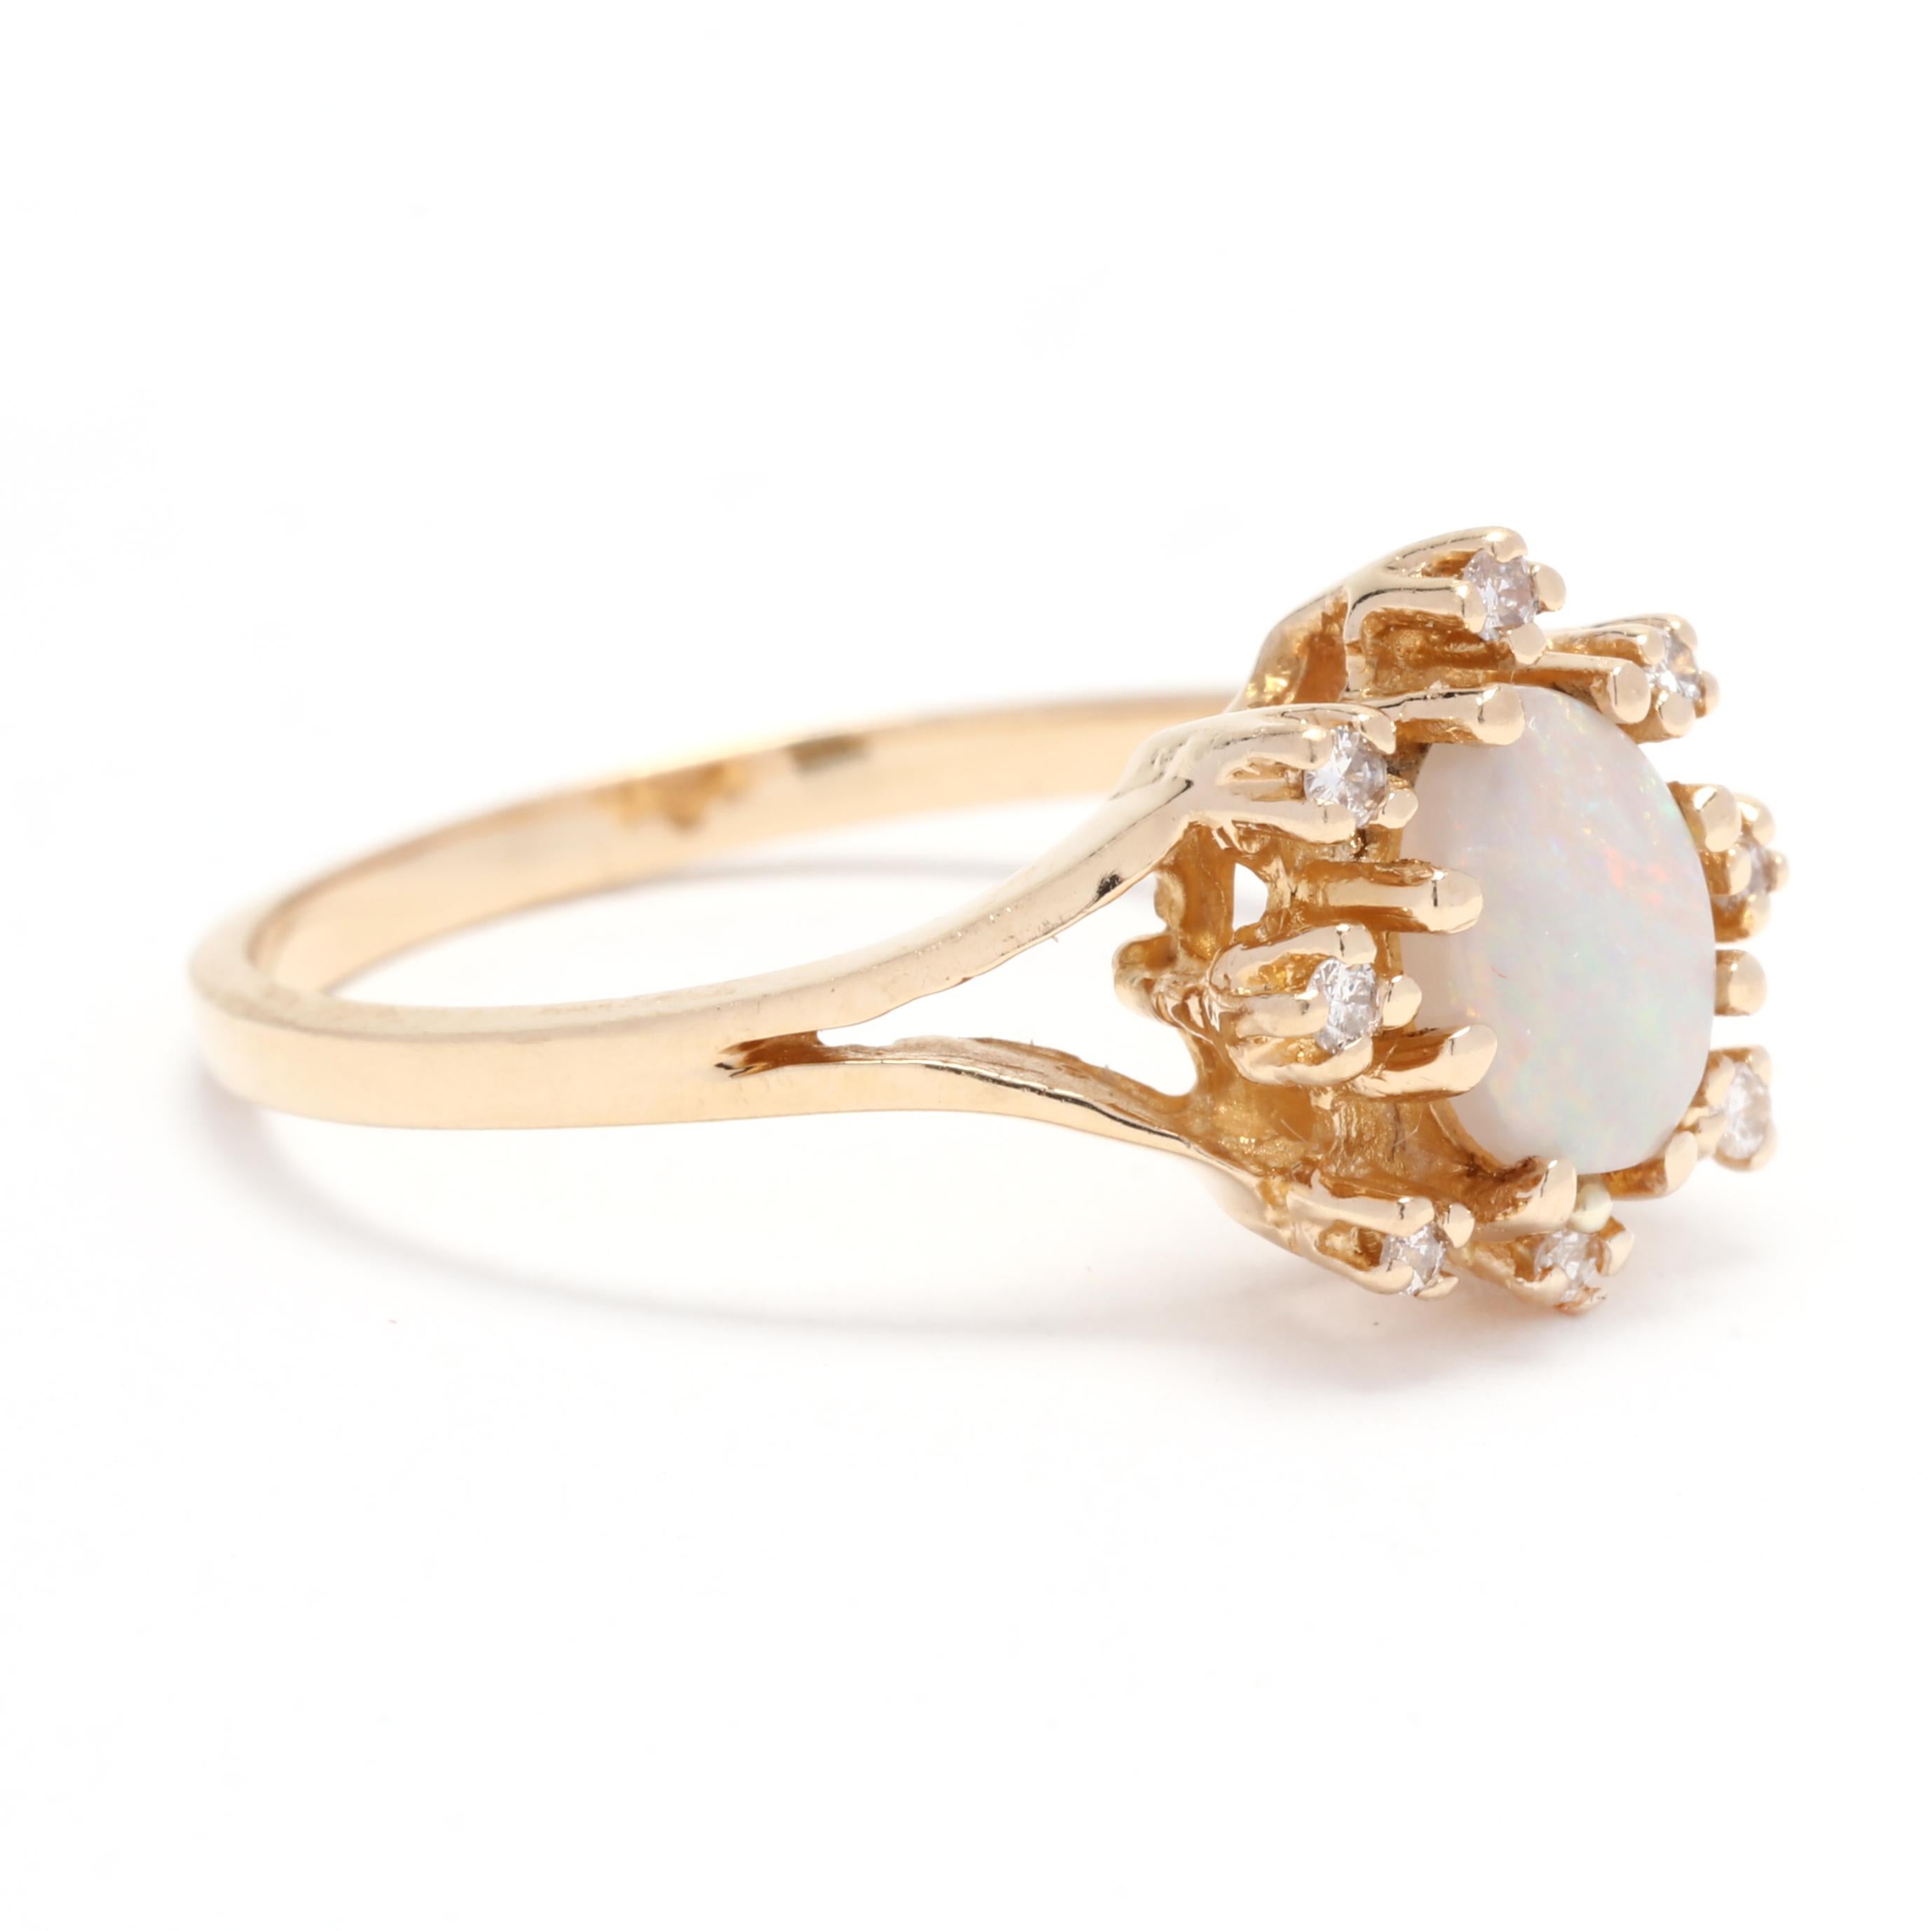 This gorgeous opal diamond halo ring is a true showstopper that will add a touch of sparkle and color to any outfit. Crafted in 14K yellow gold, the ring features a 0.53 carat oval-shaped opal at the center. The opal is surrounded by a halo of